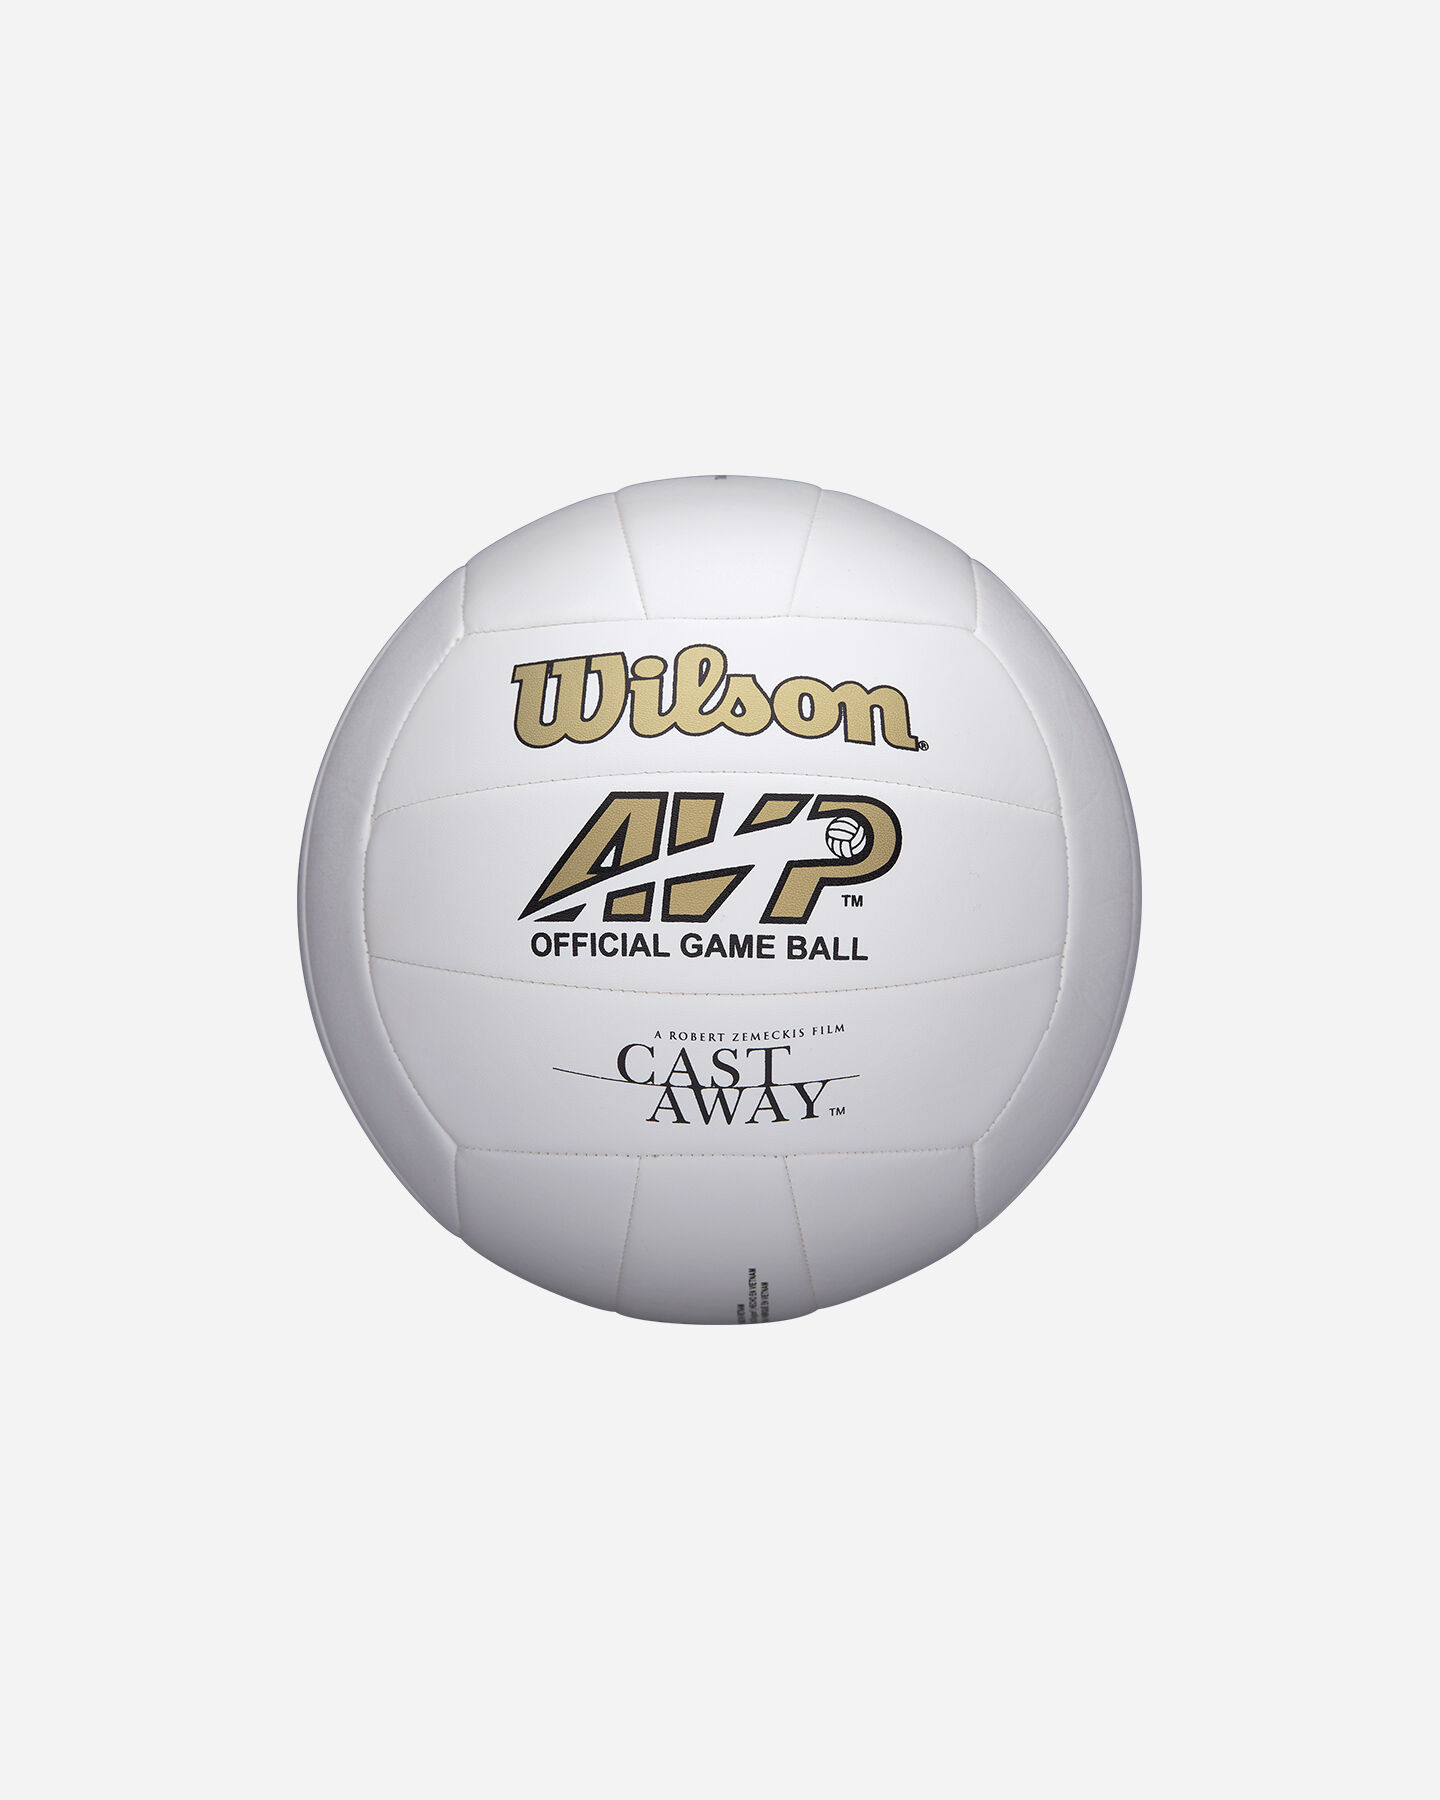  Pallone volley WILSON MR WILSON CASTAWAY  S5121699|UNI|OFFICIAL scatto 1